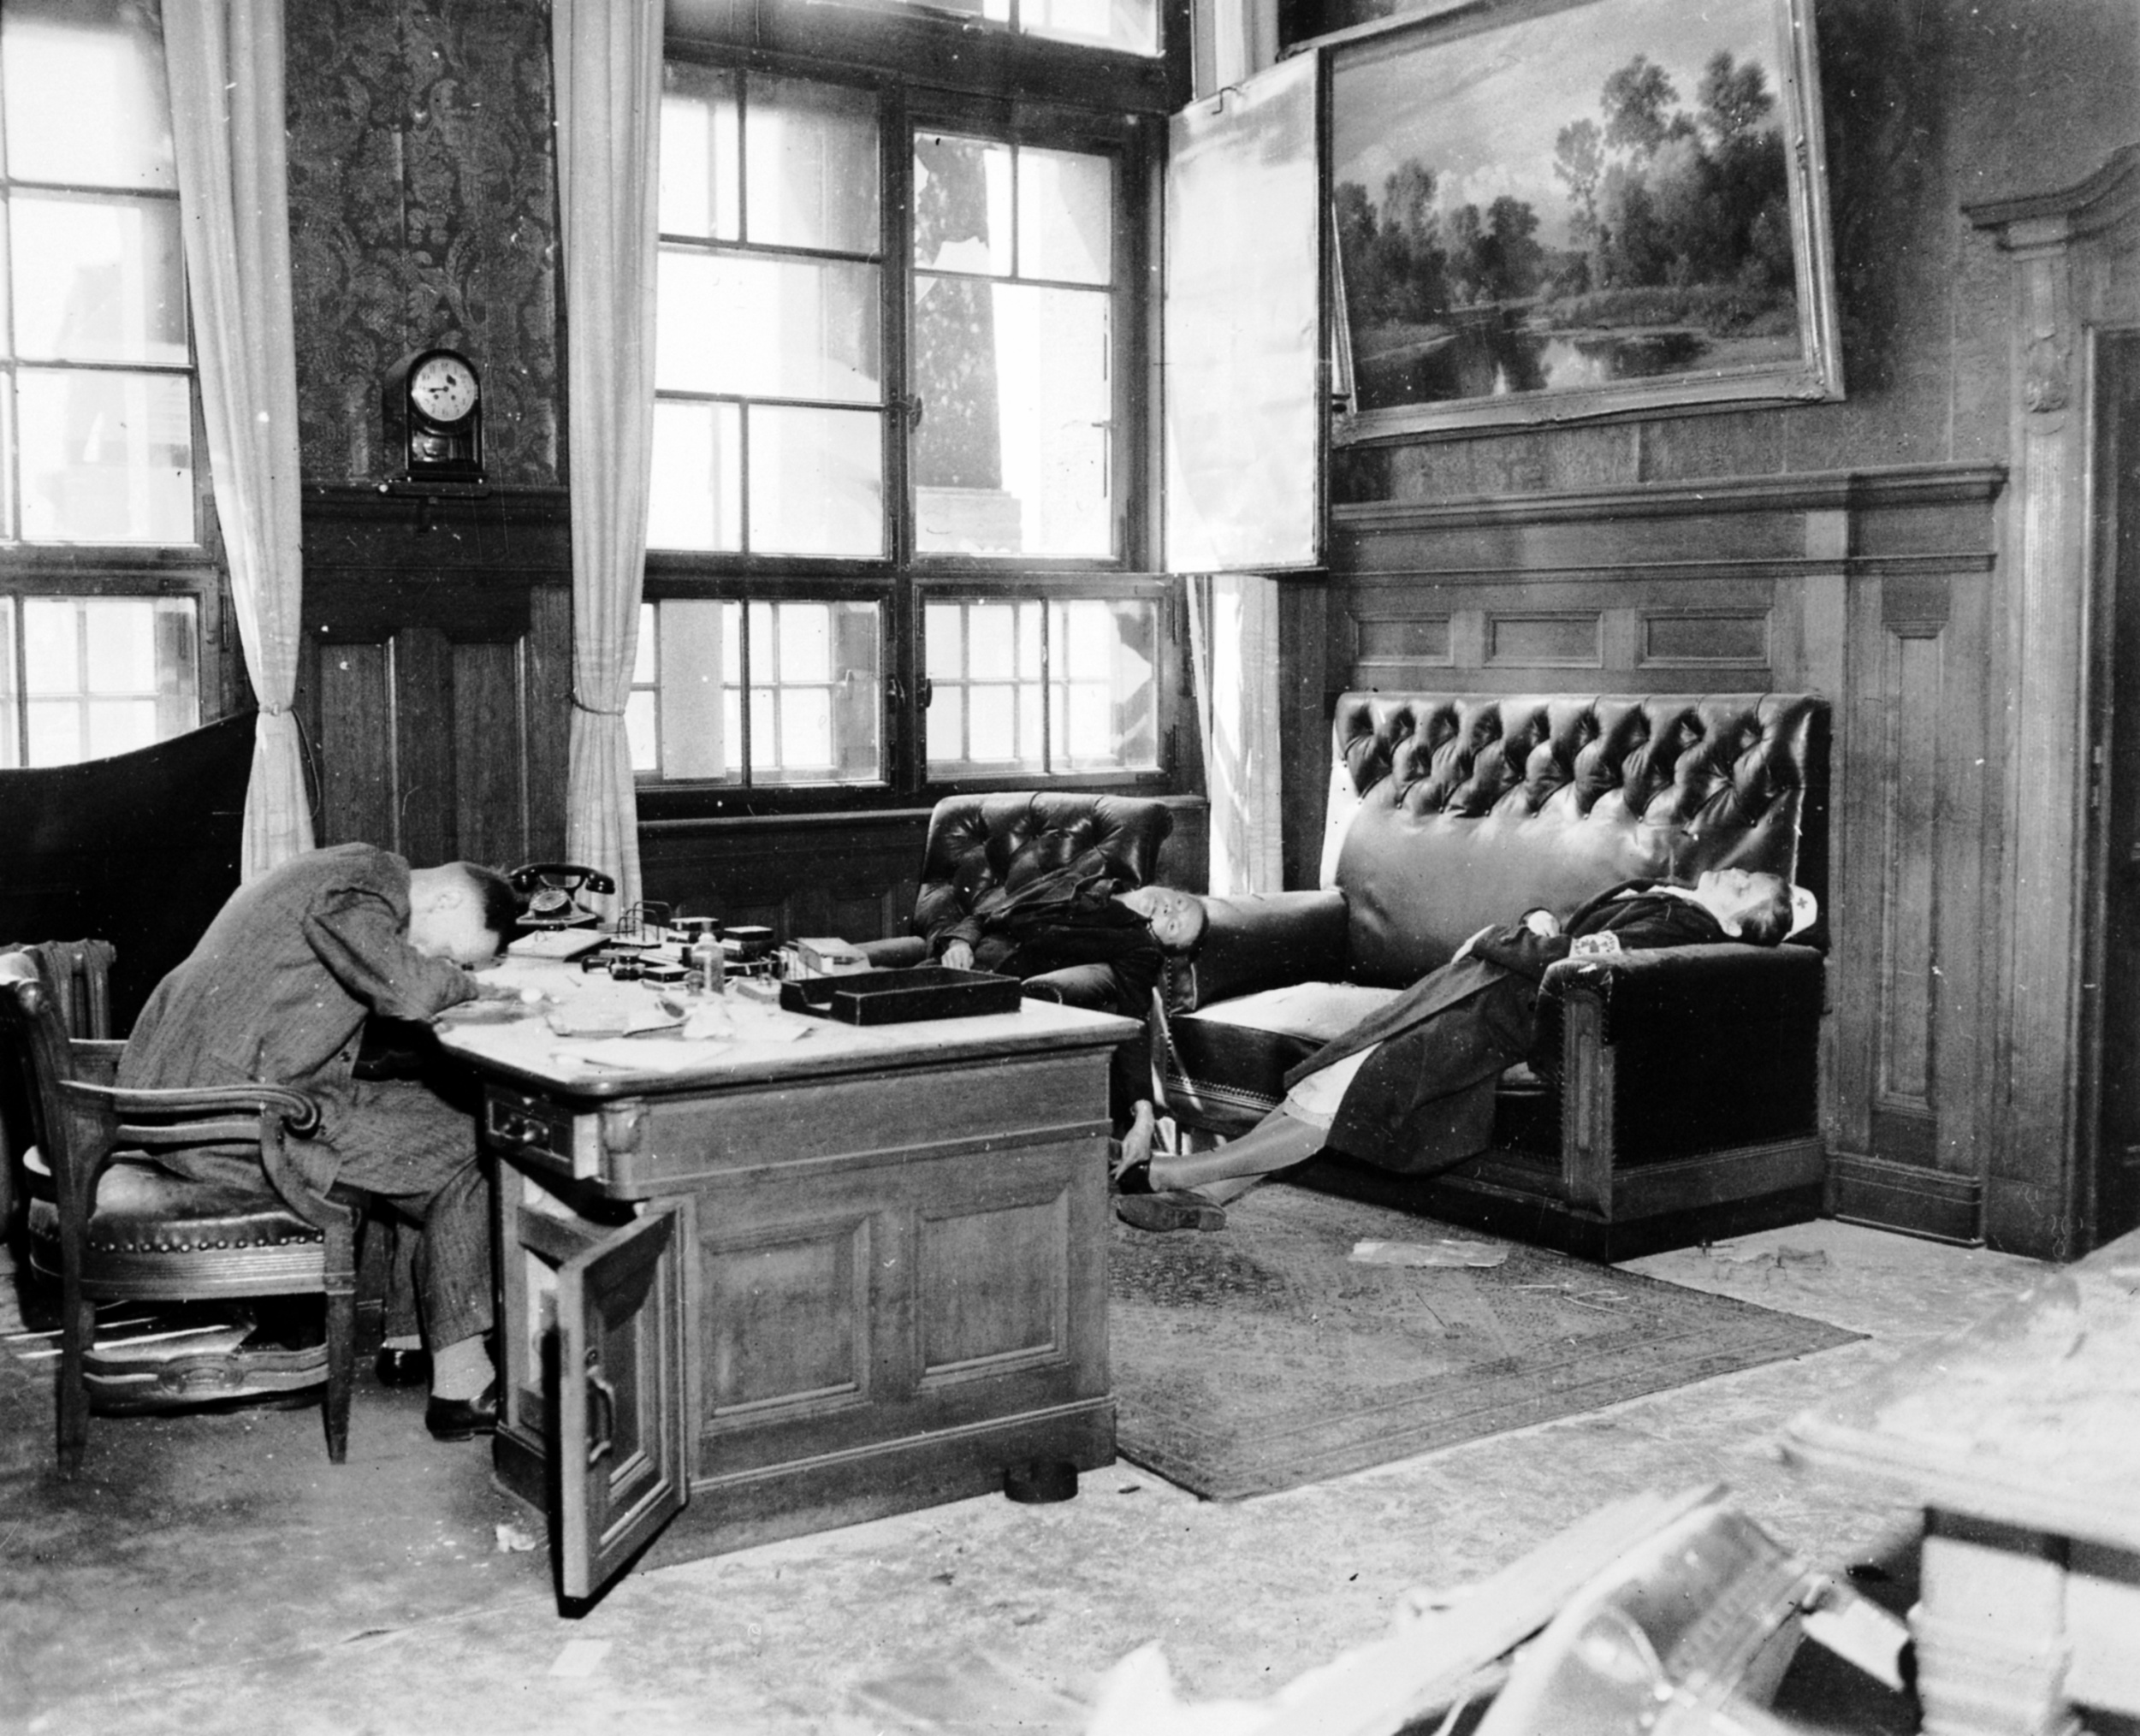 A wave of mass suicides swept Nazi Germany at the close of WW2. Here, the Deputy Mayor of Leipzig and his wife and daughter, committed suicide in the Neues Rathaus as American troops were entering the city on 20 April 1945